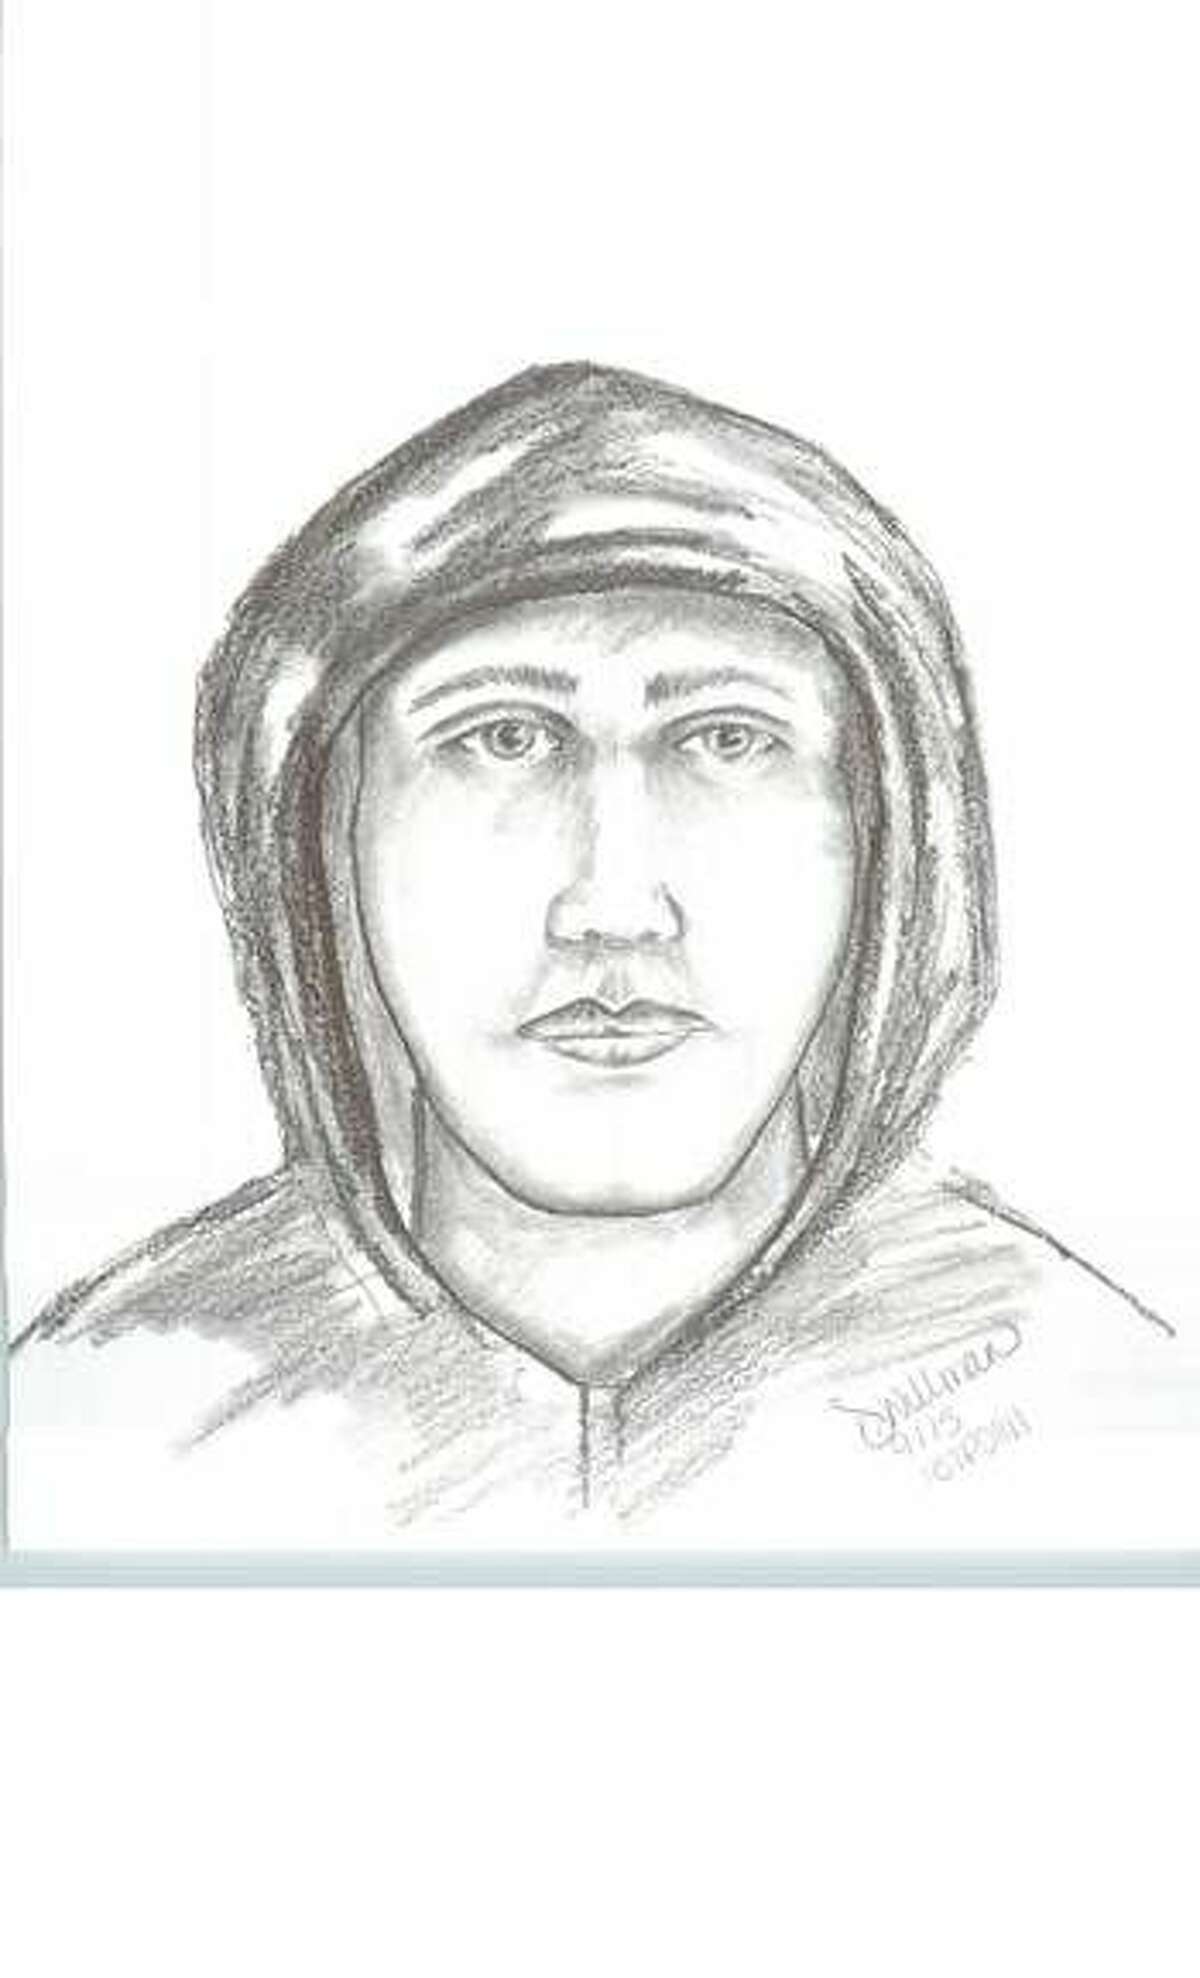 A sketch of a person of interest wanted by the Saginaw Chippewa Tribal Police for questioning regarding an alleged assault at the Soaring Eagle Casino & Resort during the evening of Aug. 19 or the early morning hours of Aug. 20